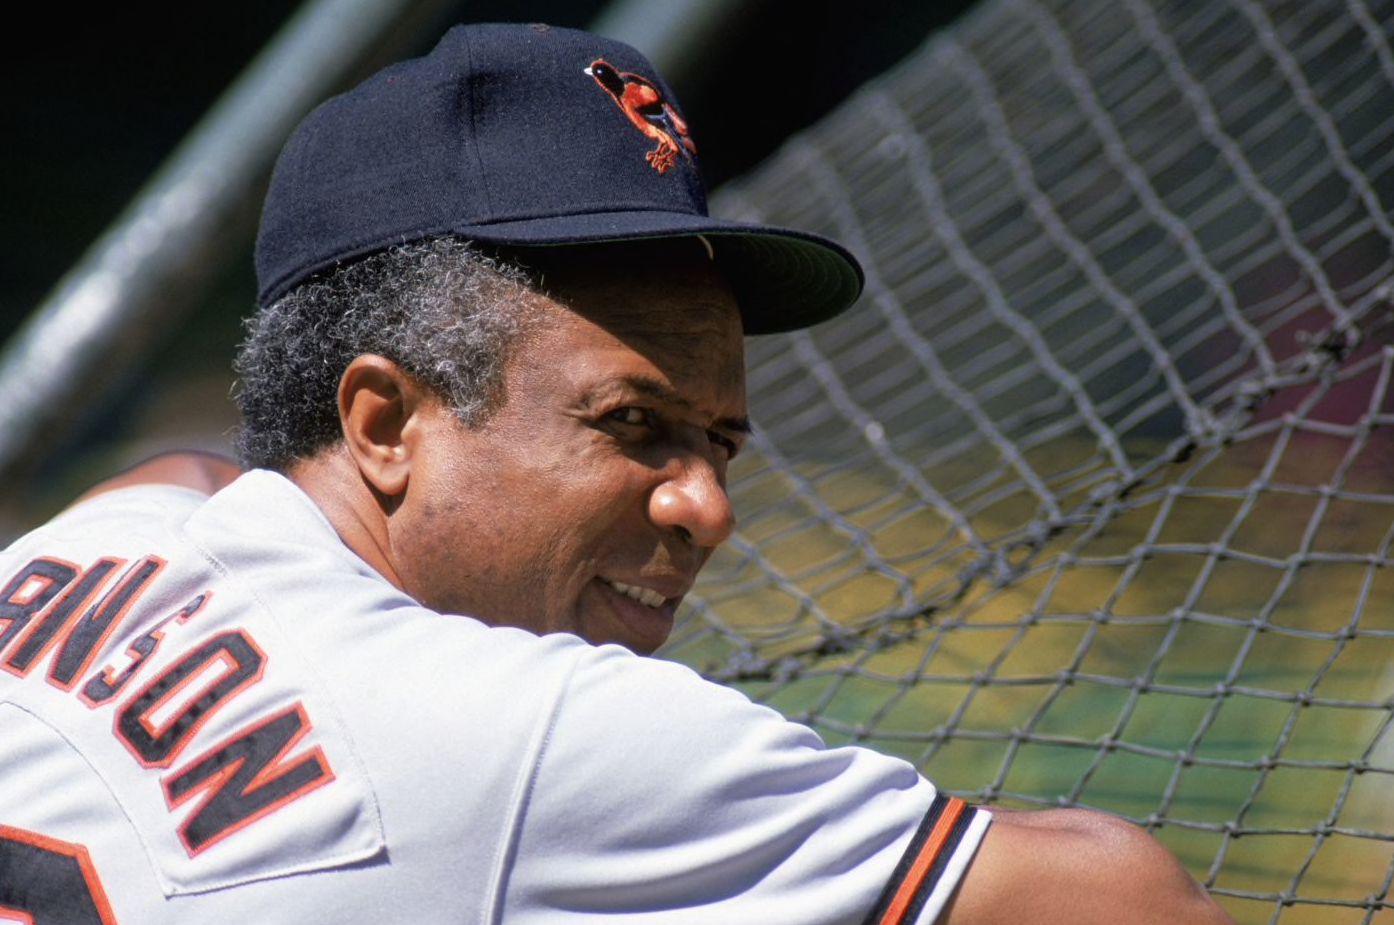 Frank Robinson was an amazing ballplayer, but a true trailblazer as the  first black manager – New York Daily News